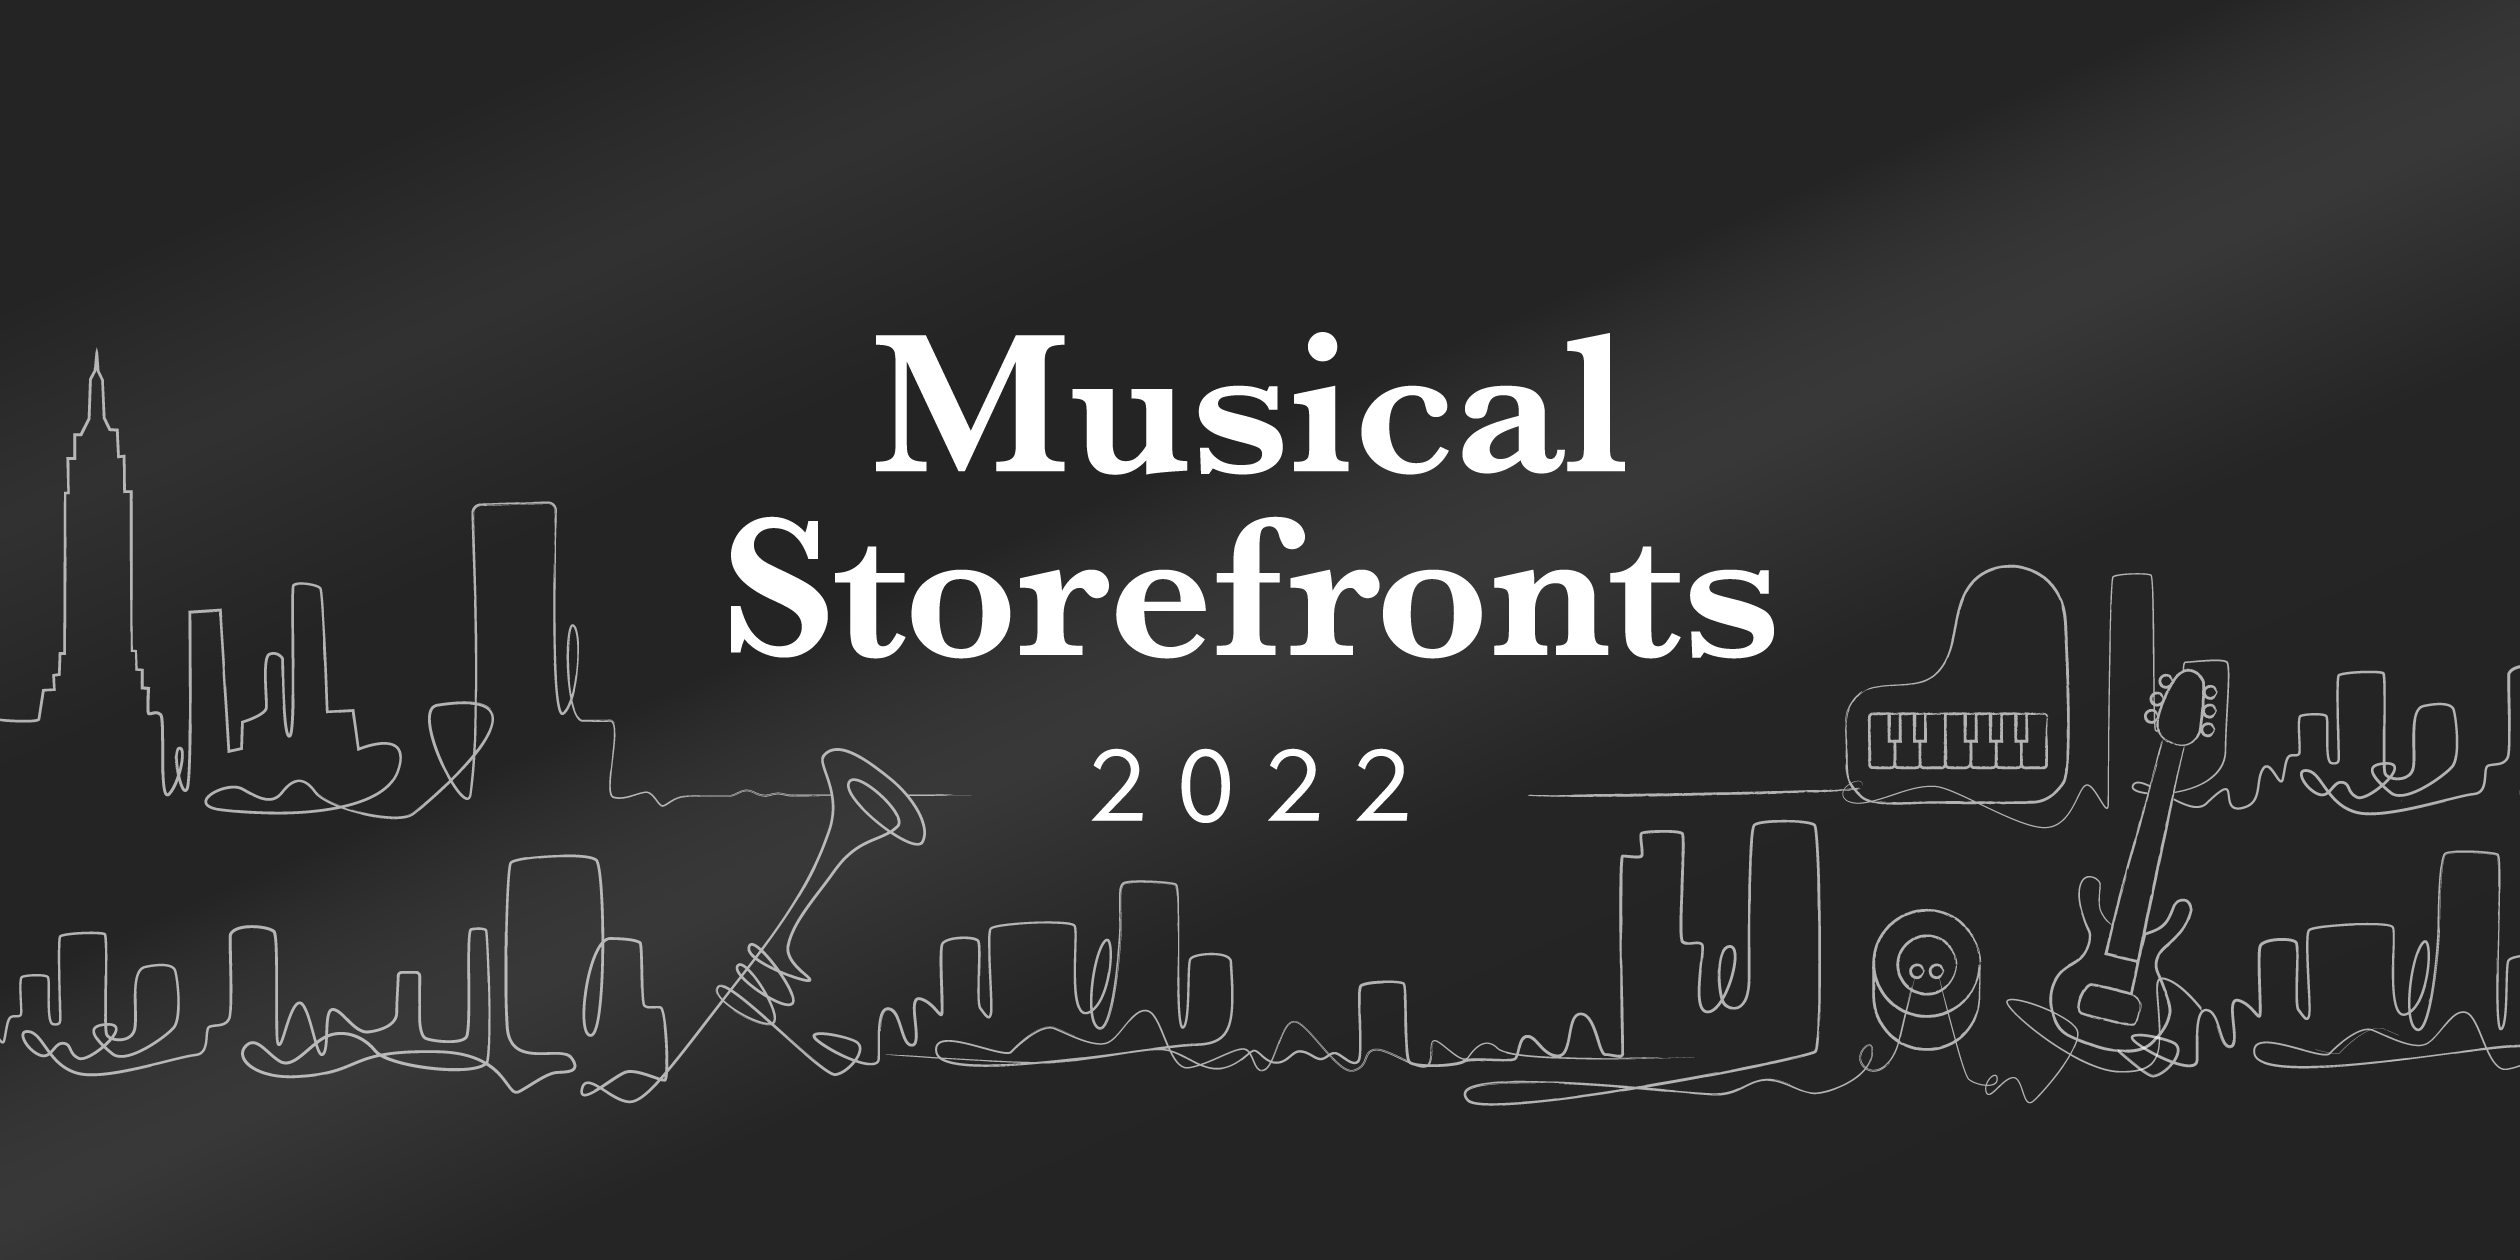 Musical Storefronts is BACK!